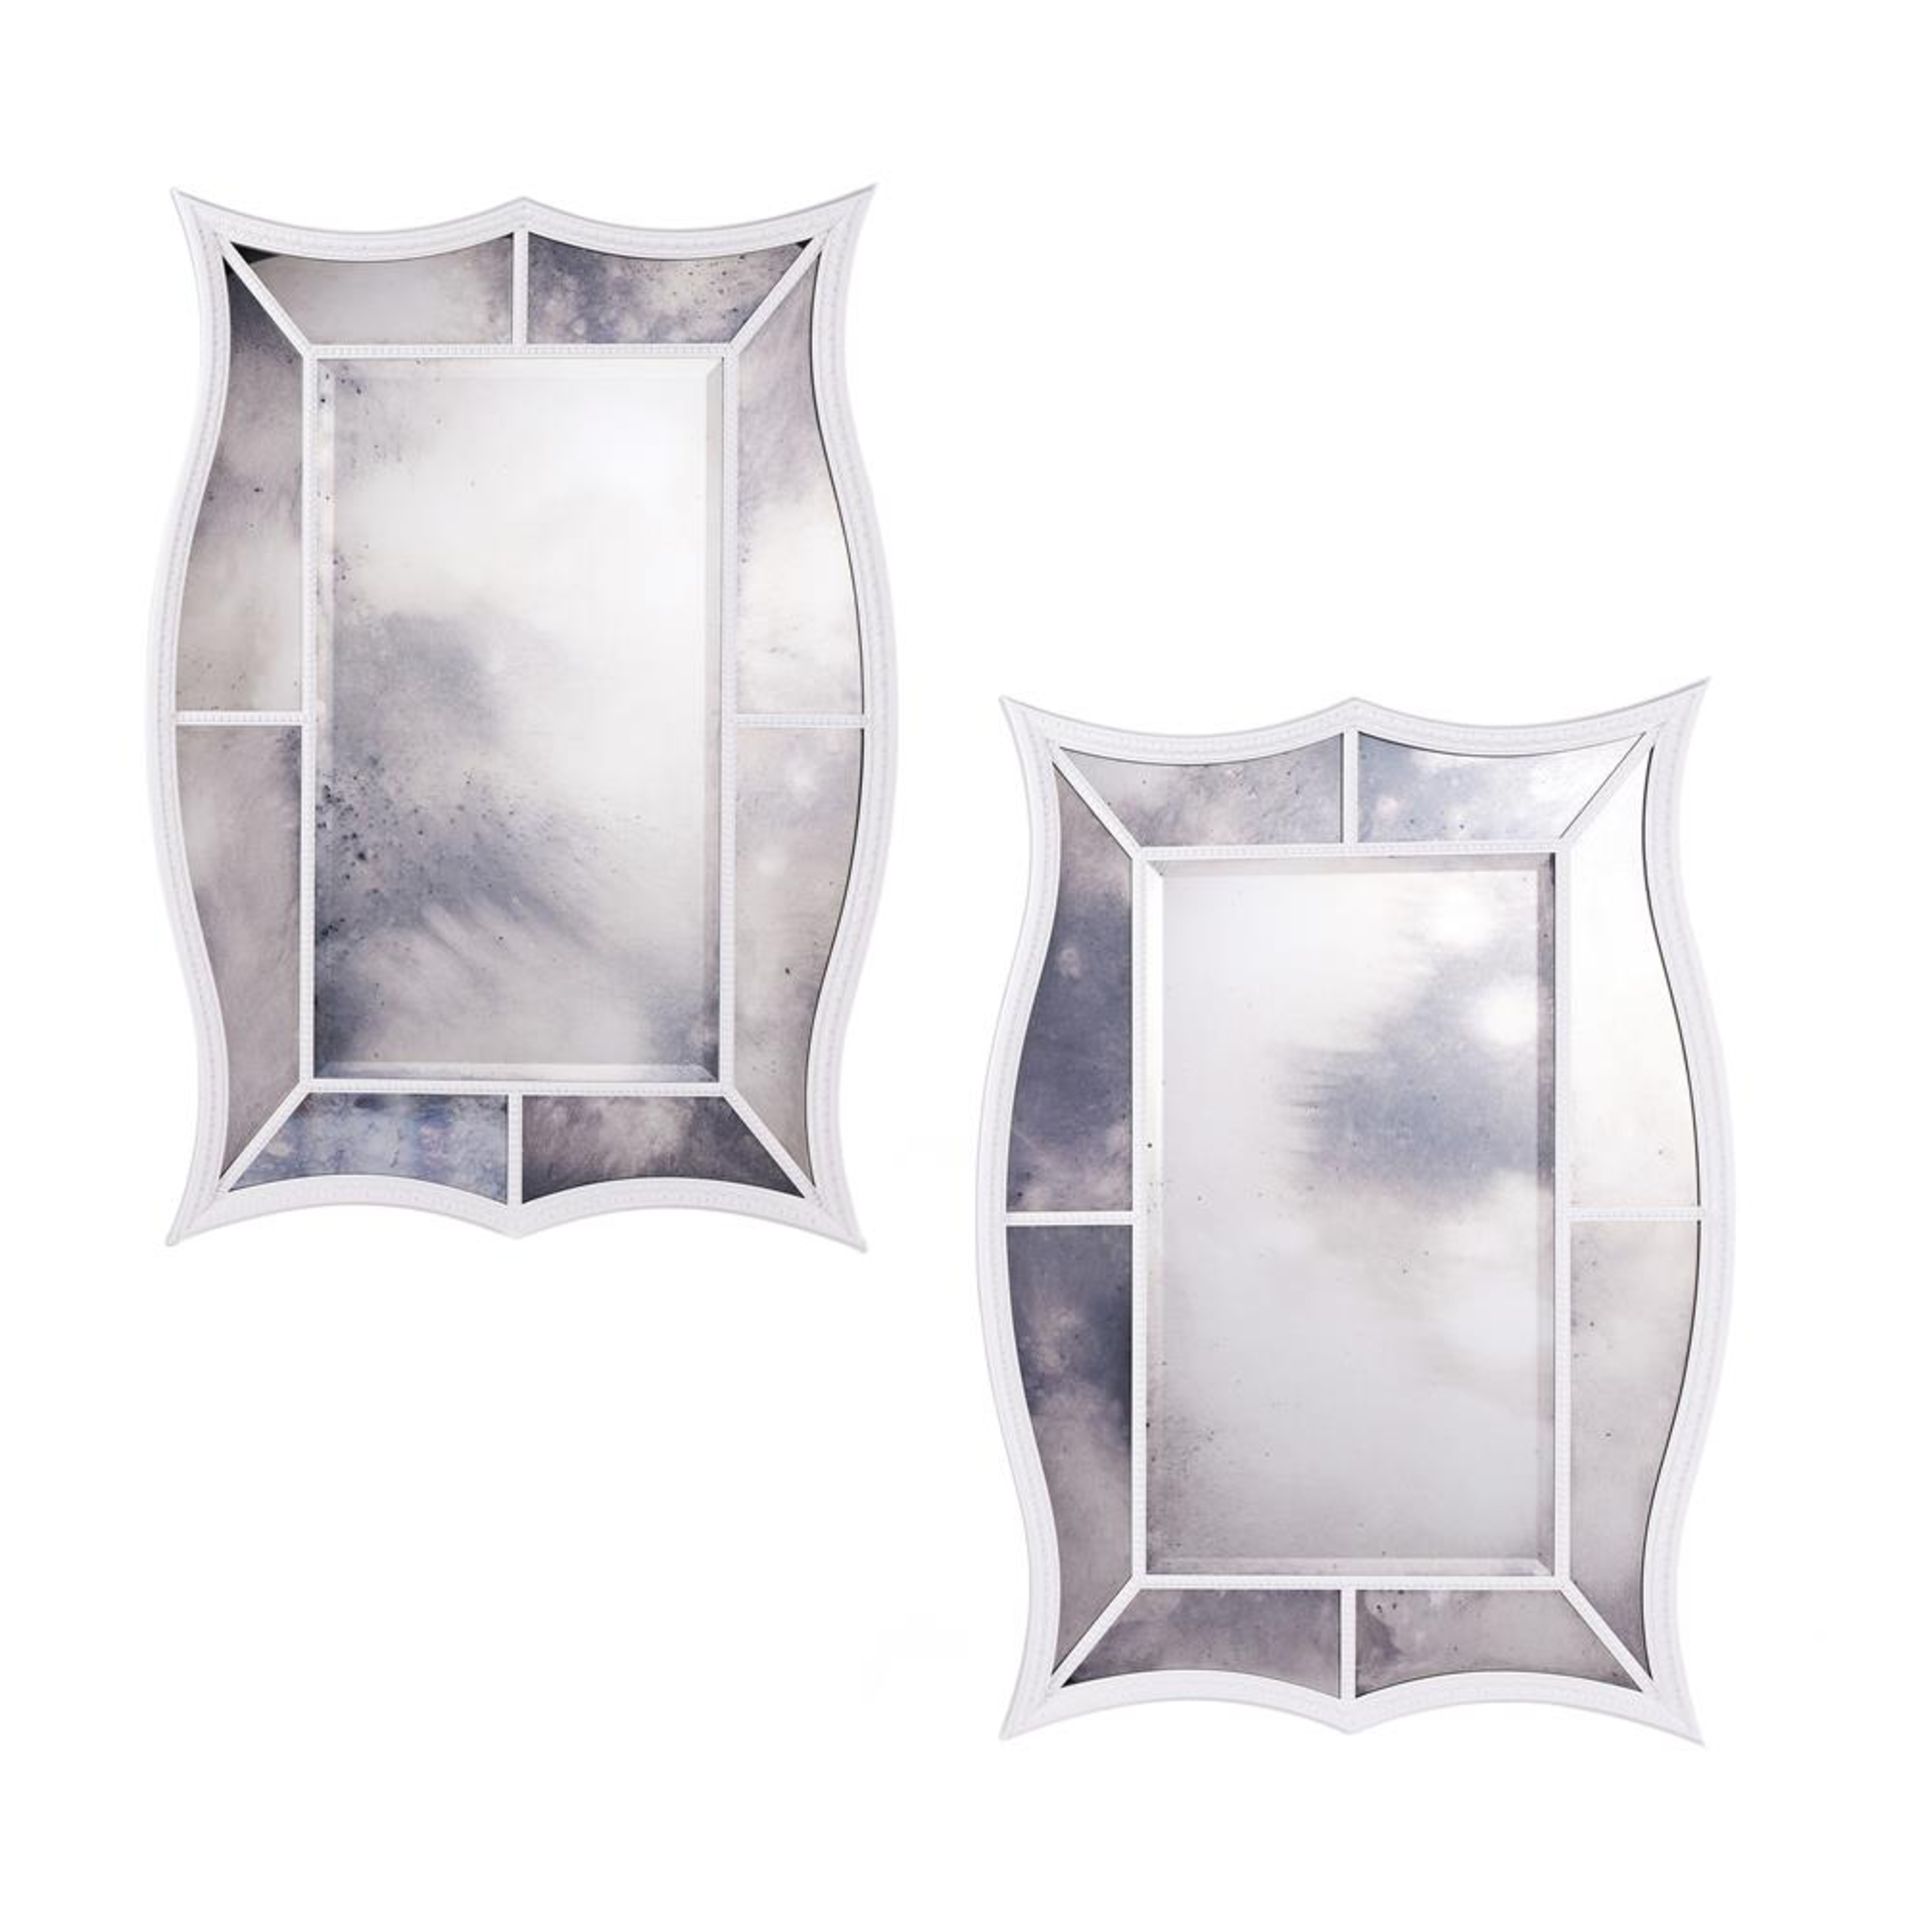 A PAIR OF WHITE PAINTED MARGINAL WALL MIRRORS, CONTEMPORARY